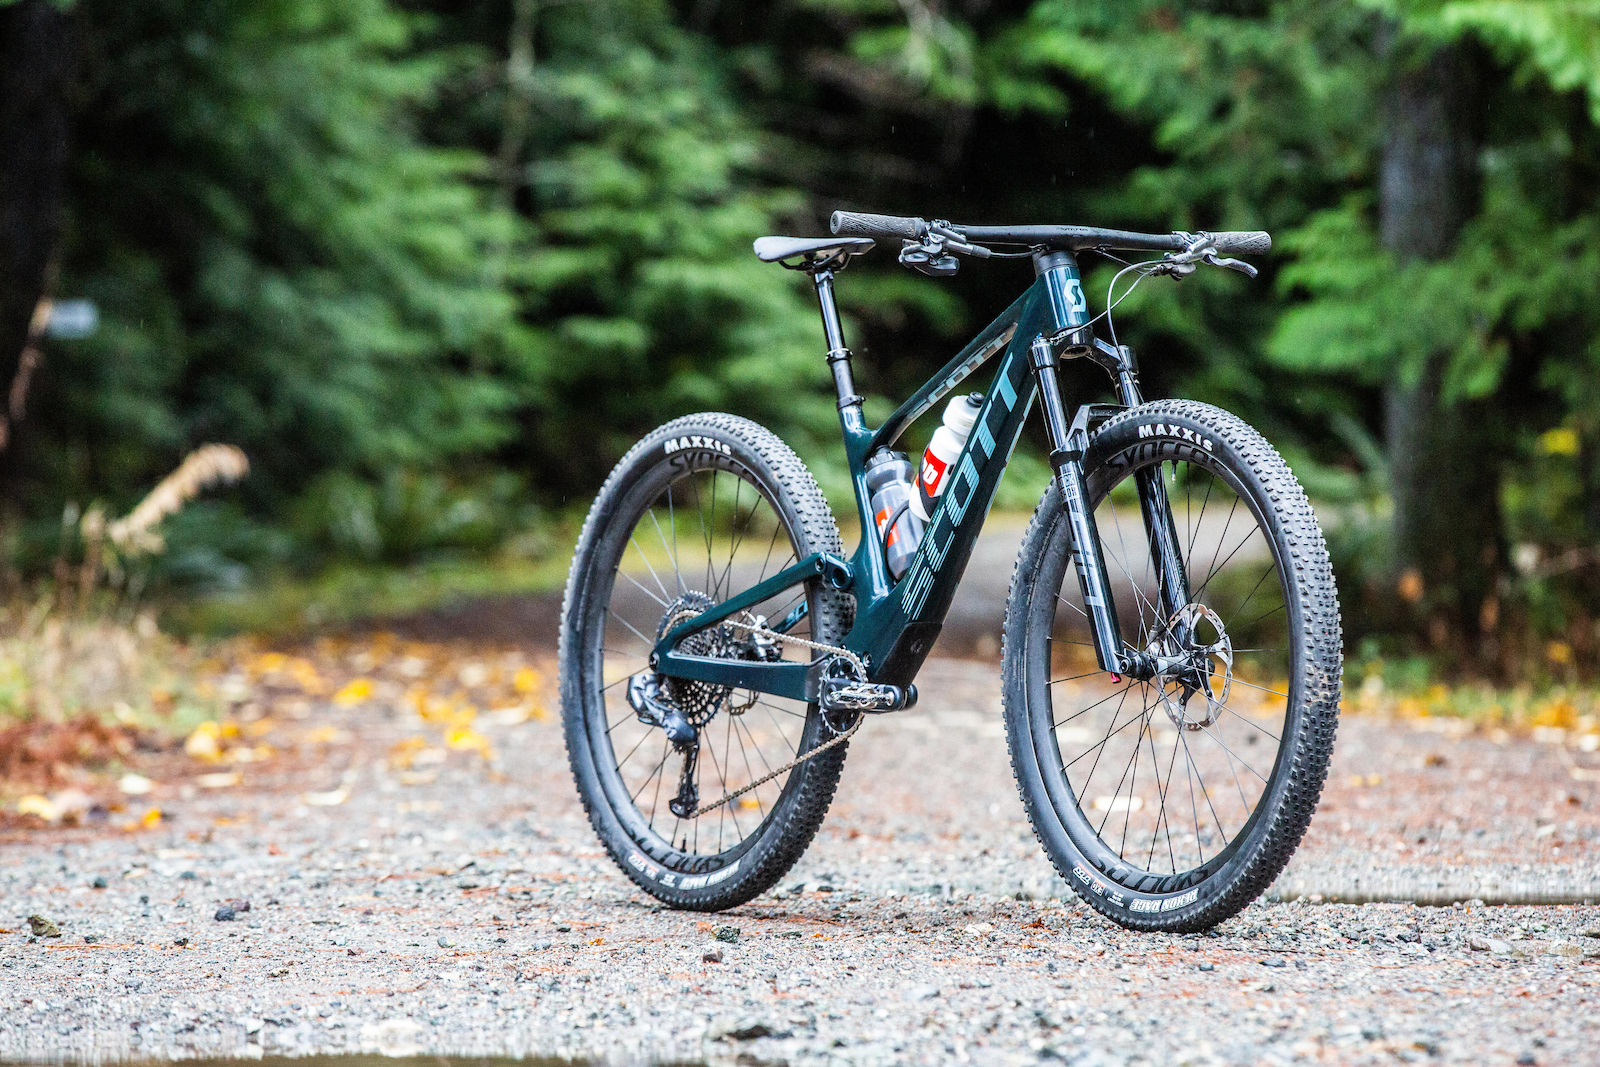 Is This Just A Gravel Bike? - Scott Scale RC 